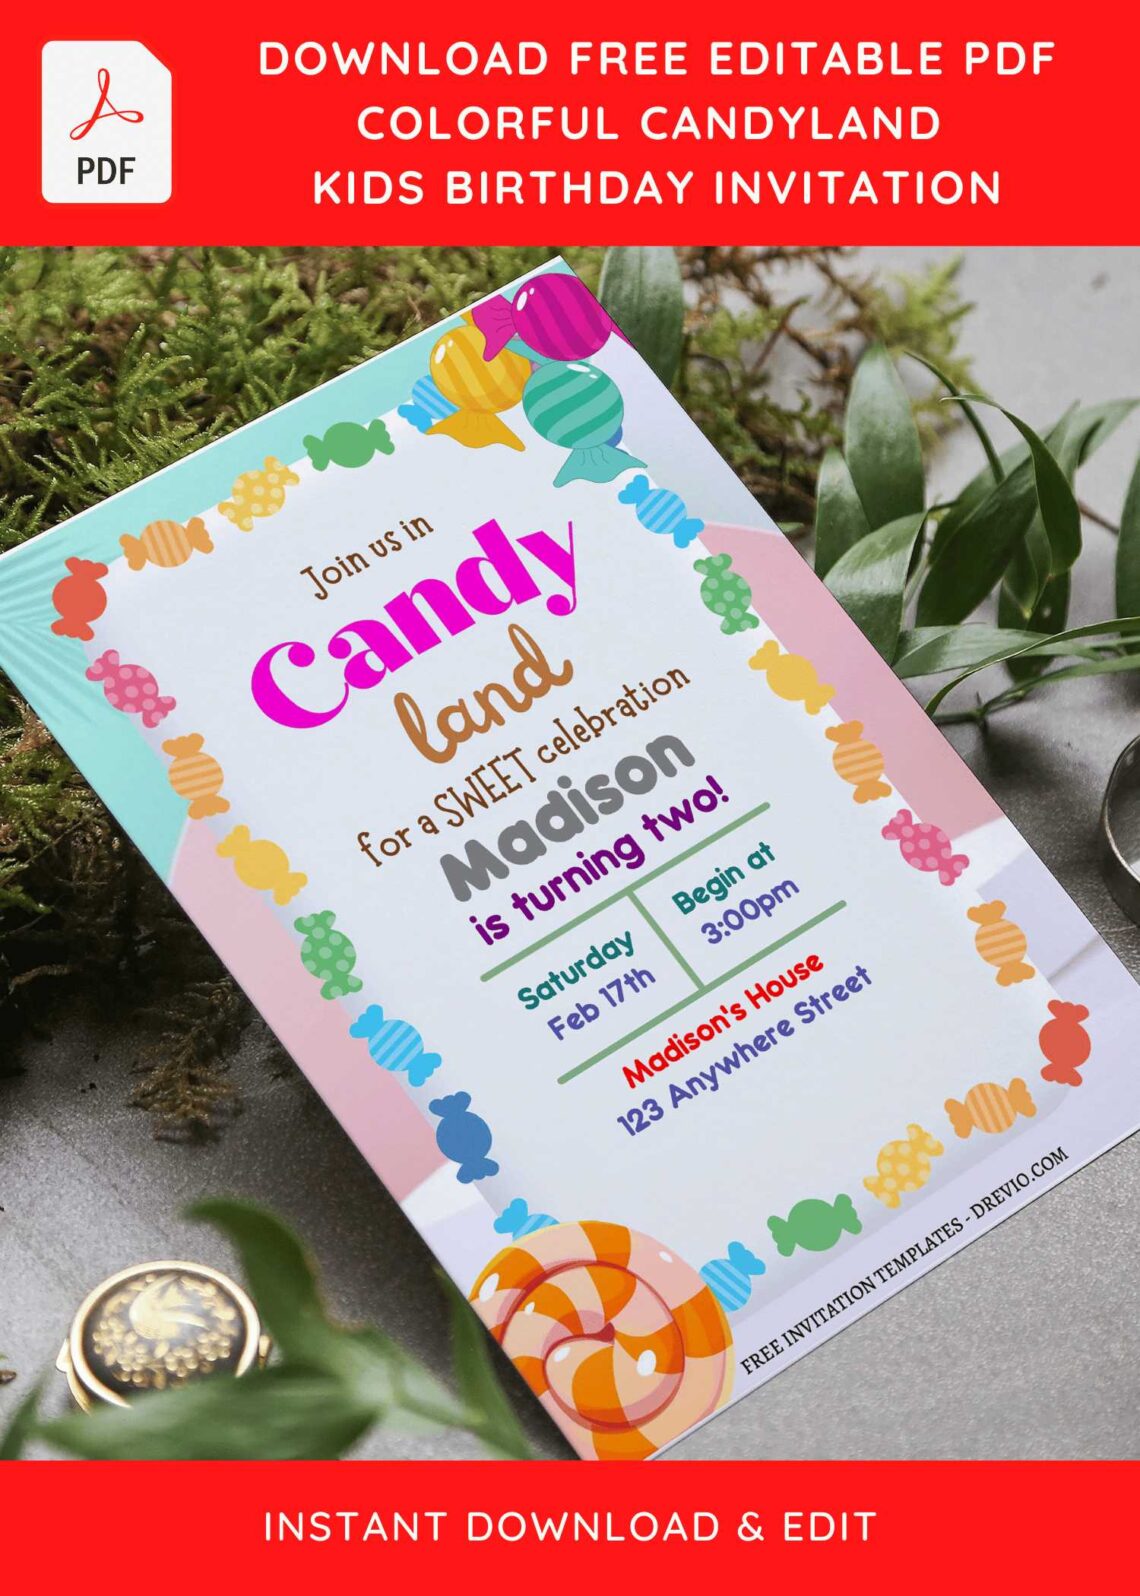 (Free Editable PDF) Sweet Candyland Birthday Invitation Templates with editable text